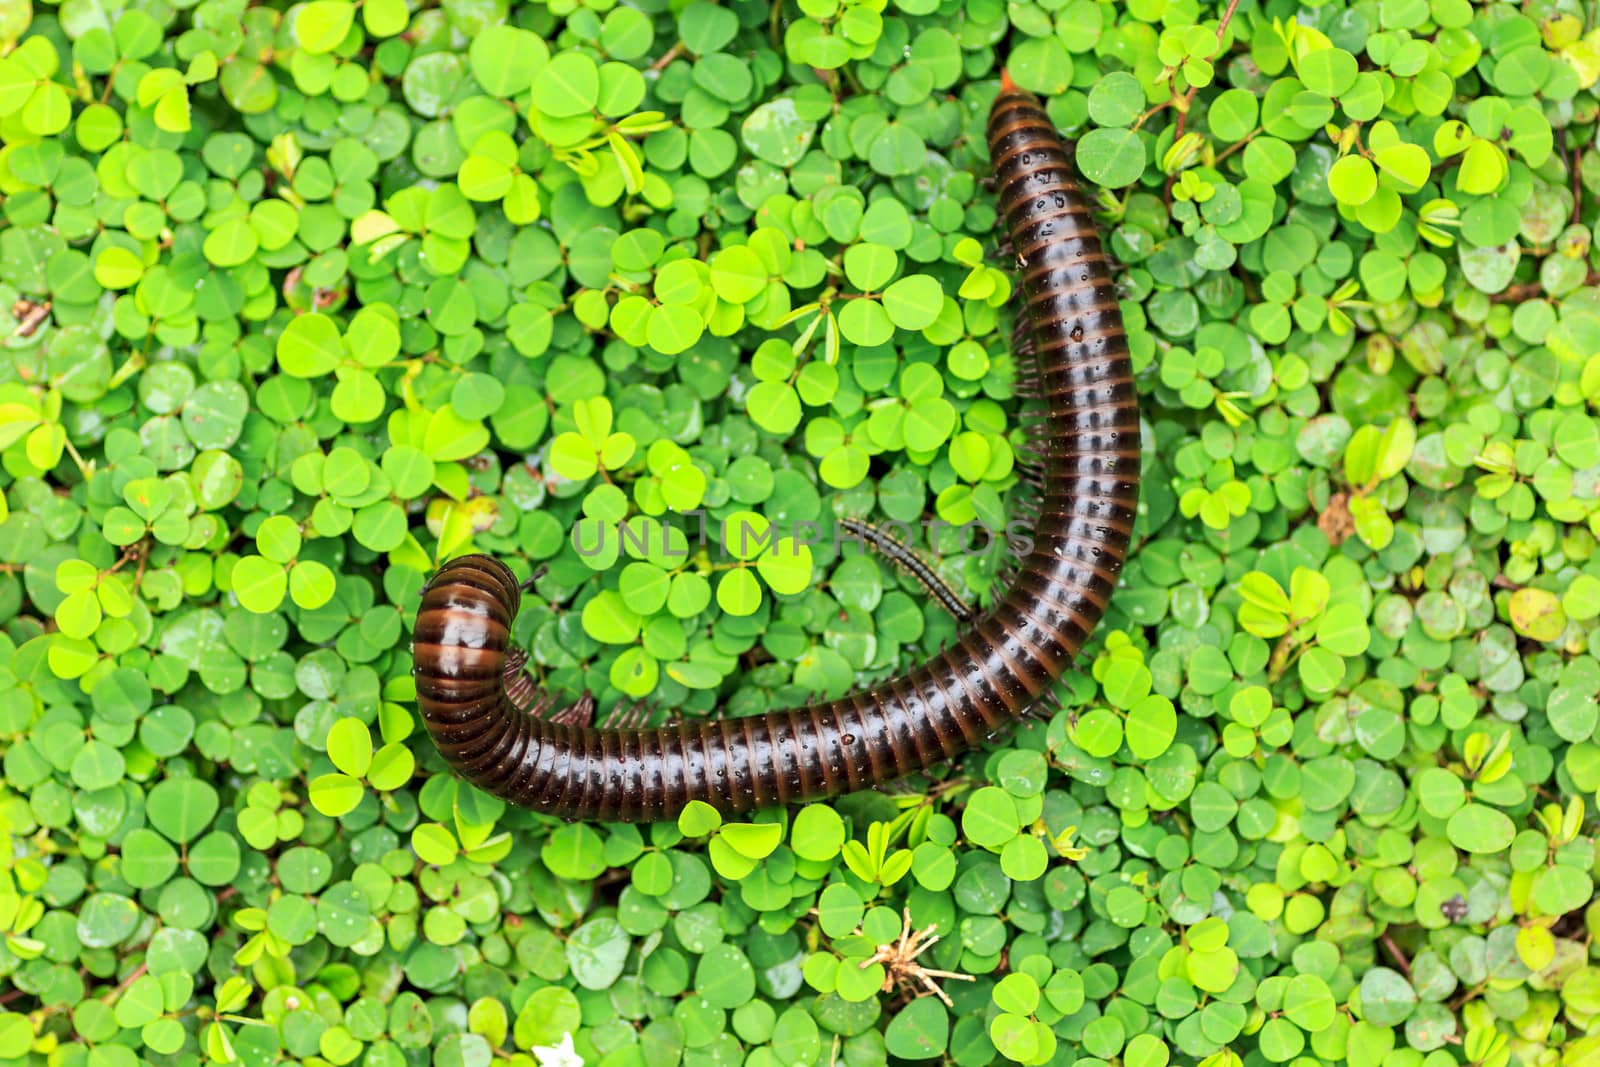 millipede  on a green field in nature